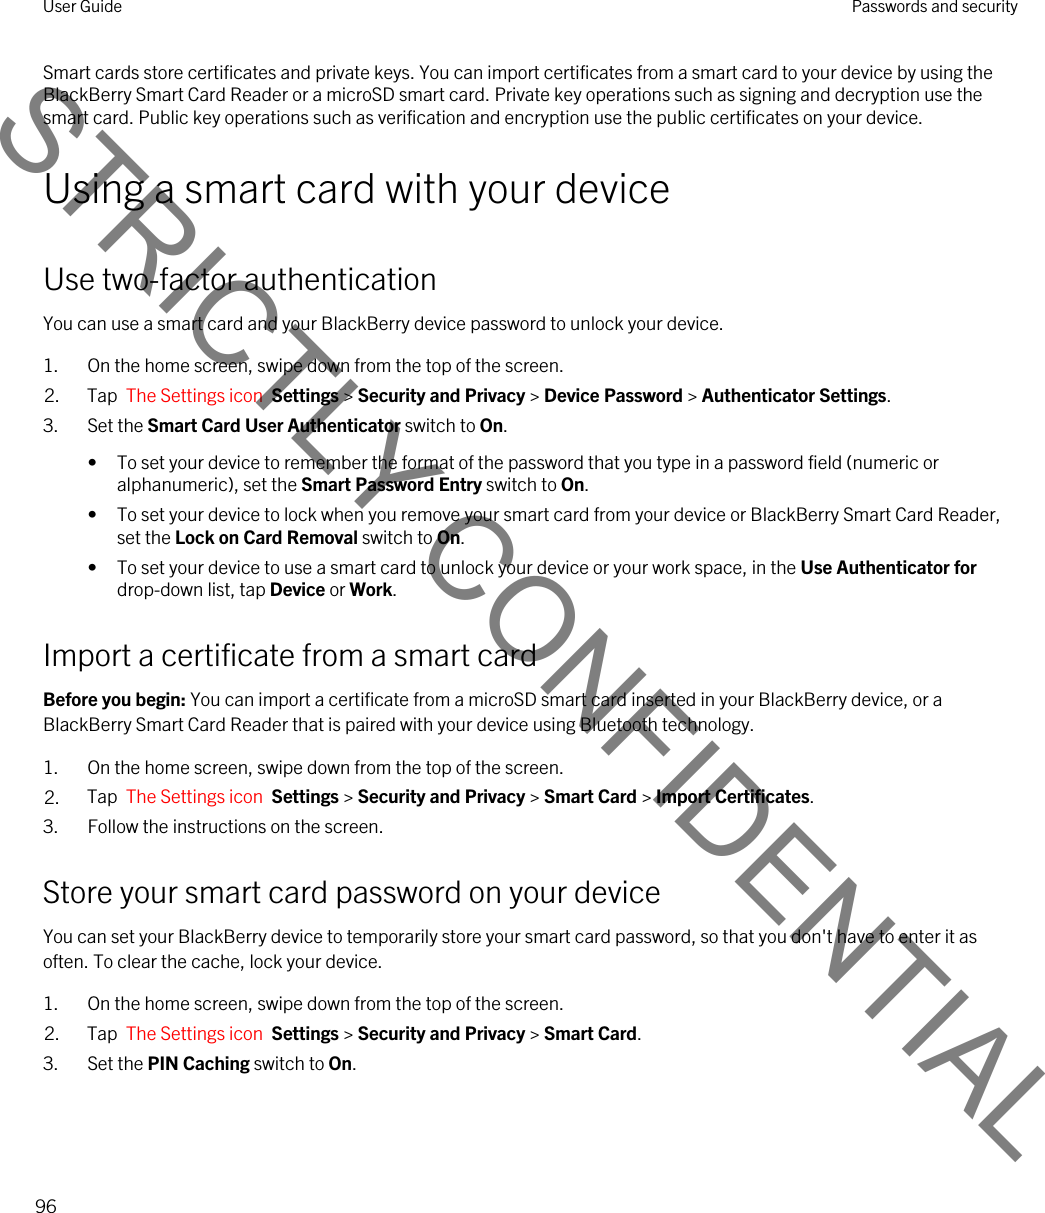 Smart cards store certificates and private keys. You can import certificates from a smart card to your device by using the BlackBerry Smart Card Reader or a microSD smart card. Private key operations such as signing and decryption use the smart card. Public key operations such as verification and encryption use the public certificates on your device.Using a smart card with your deviceUse two-factor authenticationYou can use a smart card and your BlackBerry device password to unlock your device.1. On the home screen, swipe down from the top of the screen.2. Tap  The Settings icon  Settings &gt; Security and Privacy &gt; Device Password &gt; Authenticator Settings.3. Set the Smart Card User Authenticator switch to On.• To set your device to remember the format of the password that you type in a password field (numeric or alphanumeric), set the Smart Password Entry switch to On.• To set your device to lock when you remove your smart card from your device or BlackBerry Smart Card Reader, set the Lock on Card Removal switch to On.• To set your device to use a smart card to unlock your device or your work space, in the Use Authenticator for drop-down list, tap Device or Work.Import a certificate from a smart cardBefore you begin: You can import a certificate from a microSD smart card inserted in your BlackBerry device, or a BlackBerry Smart Card Reader that is paired with your device using Bluetooth technology.1. On the home screen, swipe down from the top of the screen.2. Tap  The Settings icon  Settings &gt; Security and Privacy &gt; Smart Card &gt; Import Certificates.3. Follow the instructions on the screen.Store your smart card password on your deviceYou can set your BlackBerry device to temporarily store your smart card password, so that you don&apos;t have to enter it as often. To clear the cache, lock your device.1. On the home screen, swipe down from the top of the screen.2. Tap  The Settings icon  Settings &gt; Security and Privacy &gt; Smart Card.3. Set the PIN Caching switch to On.User Guide Passwords and security96STRICTLY CONFIDENTIAL